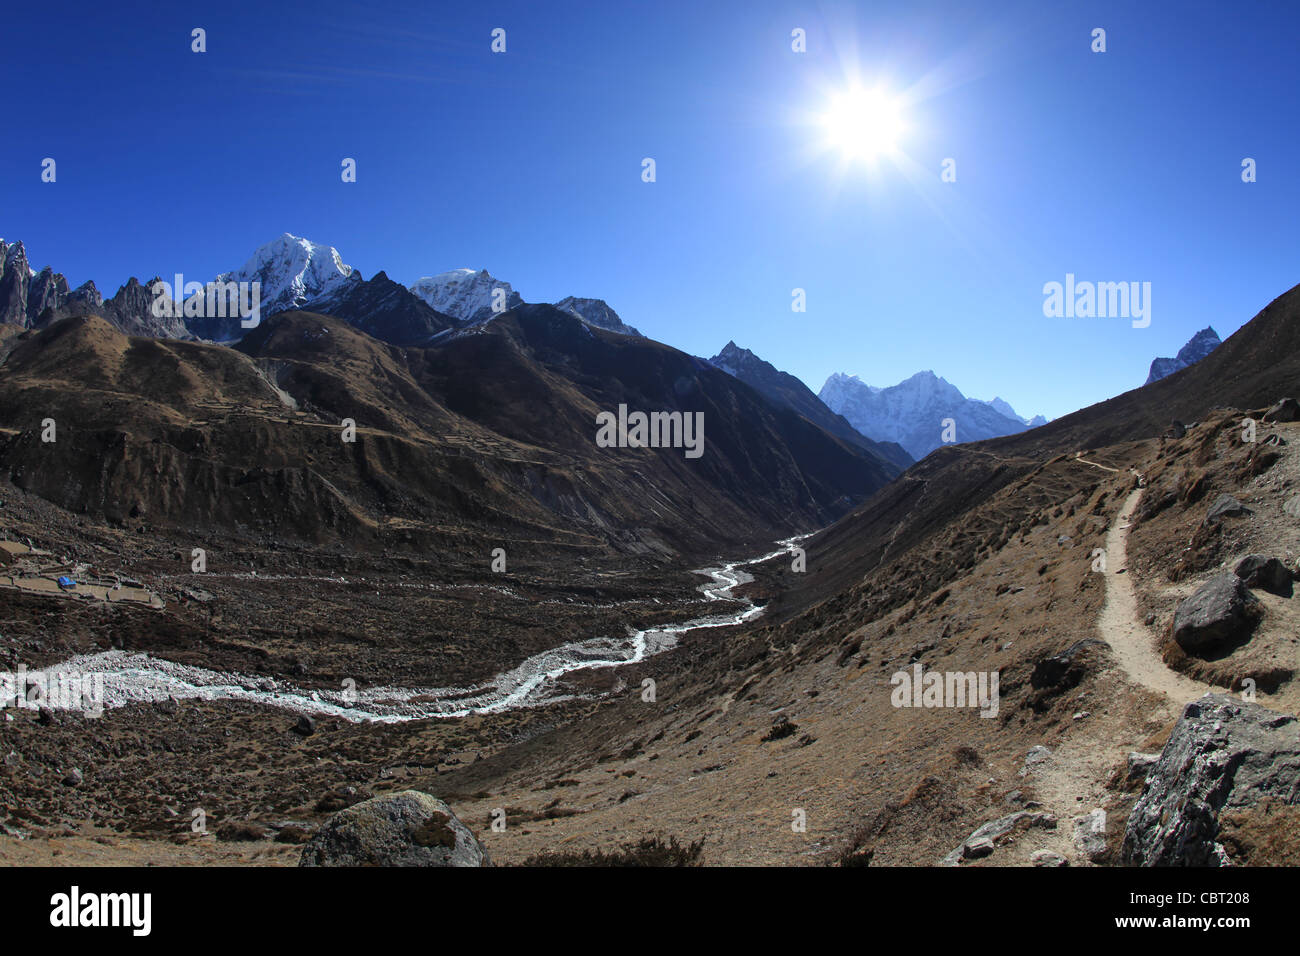 View of the Gokyo Valley River in the Himalayas Stock Photo